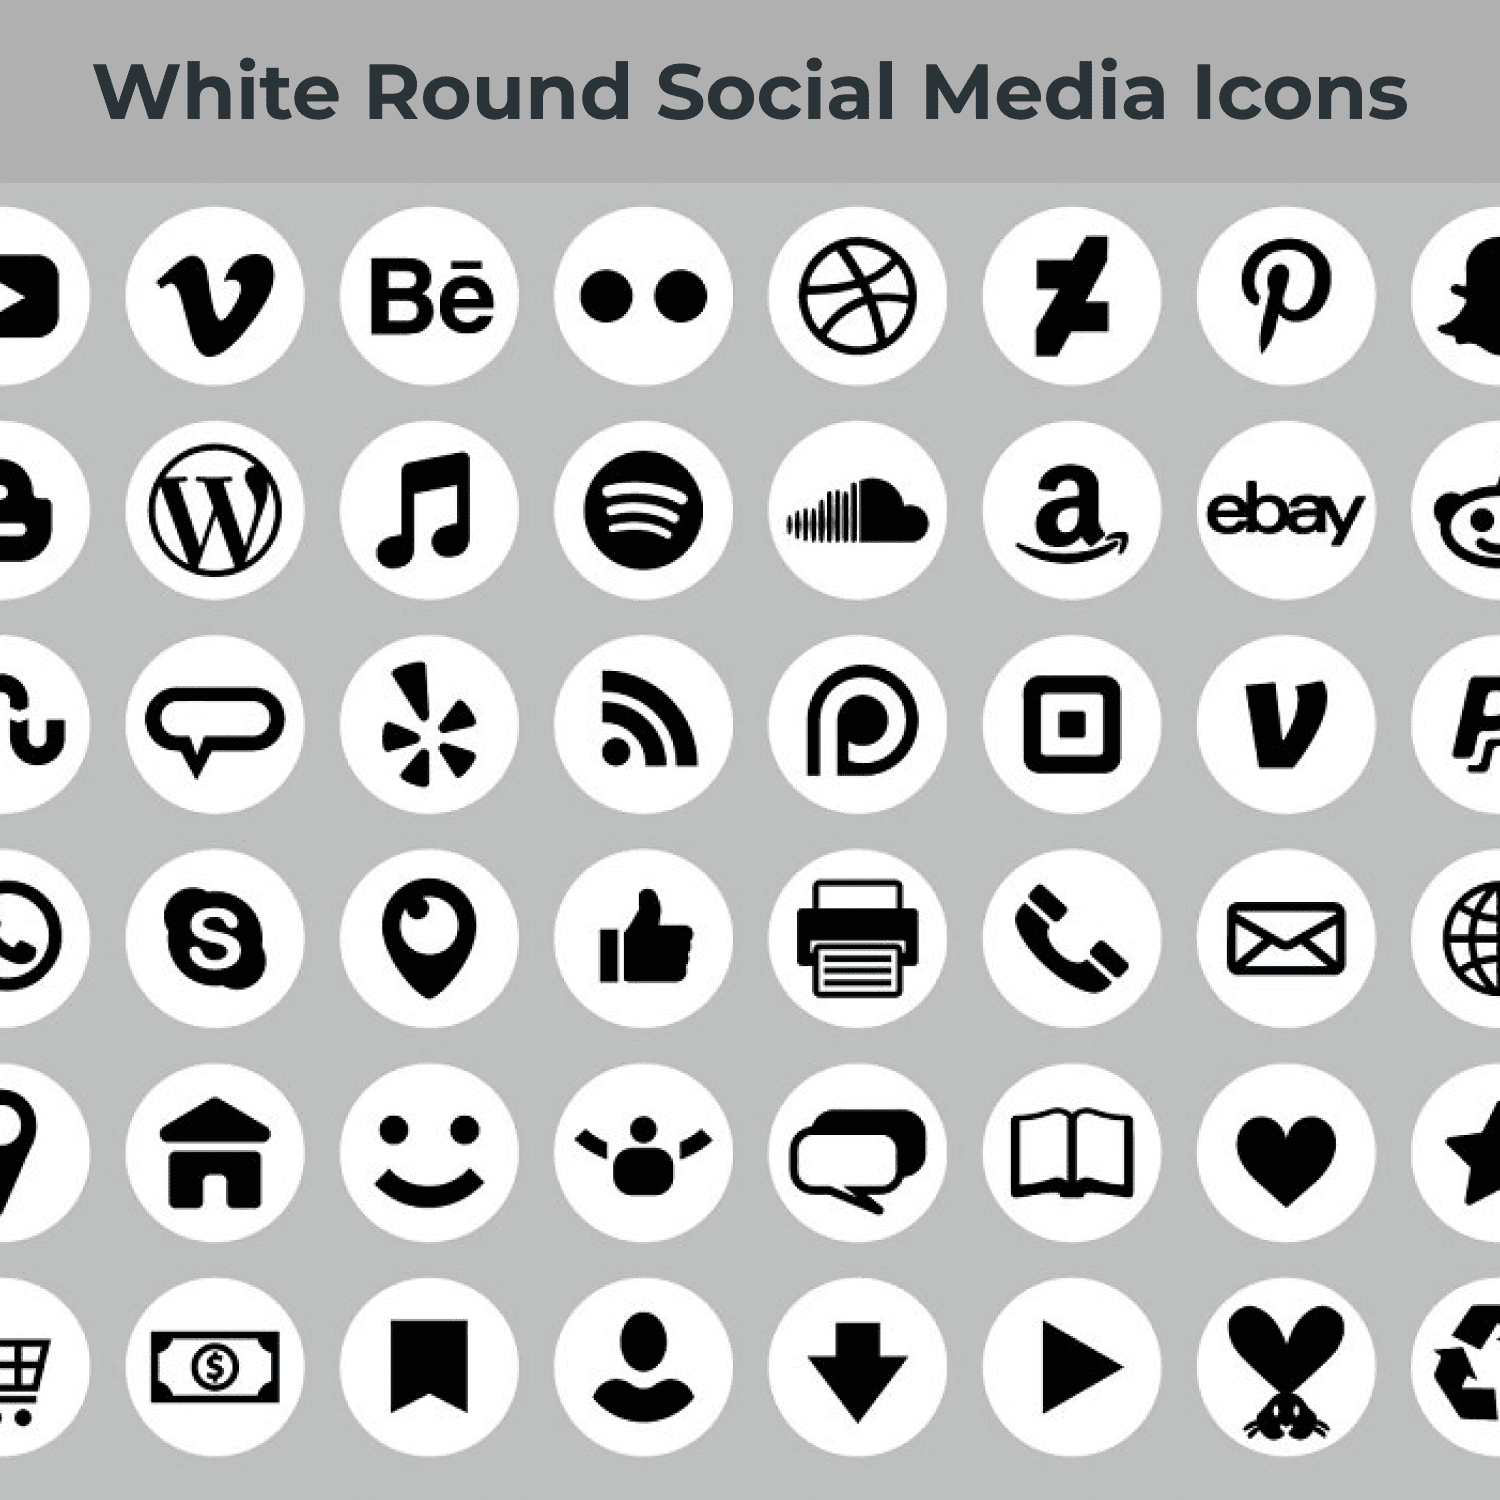 White Round Social Media Icons main cover.